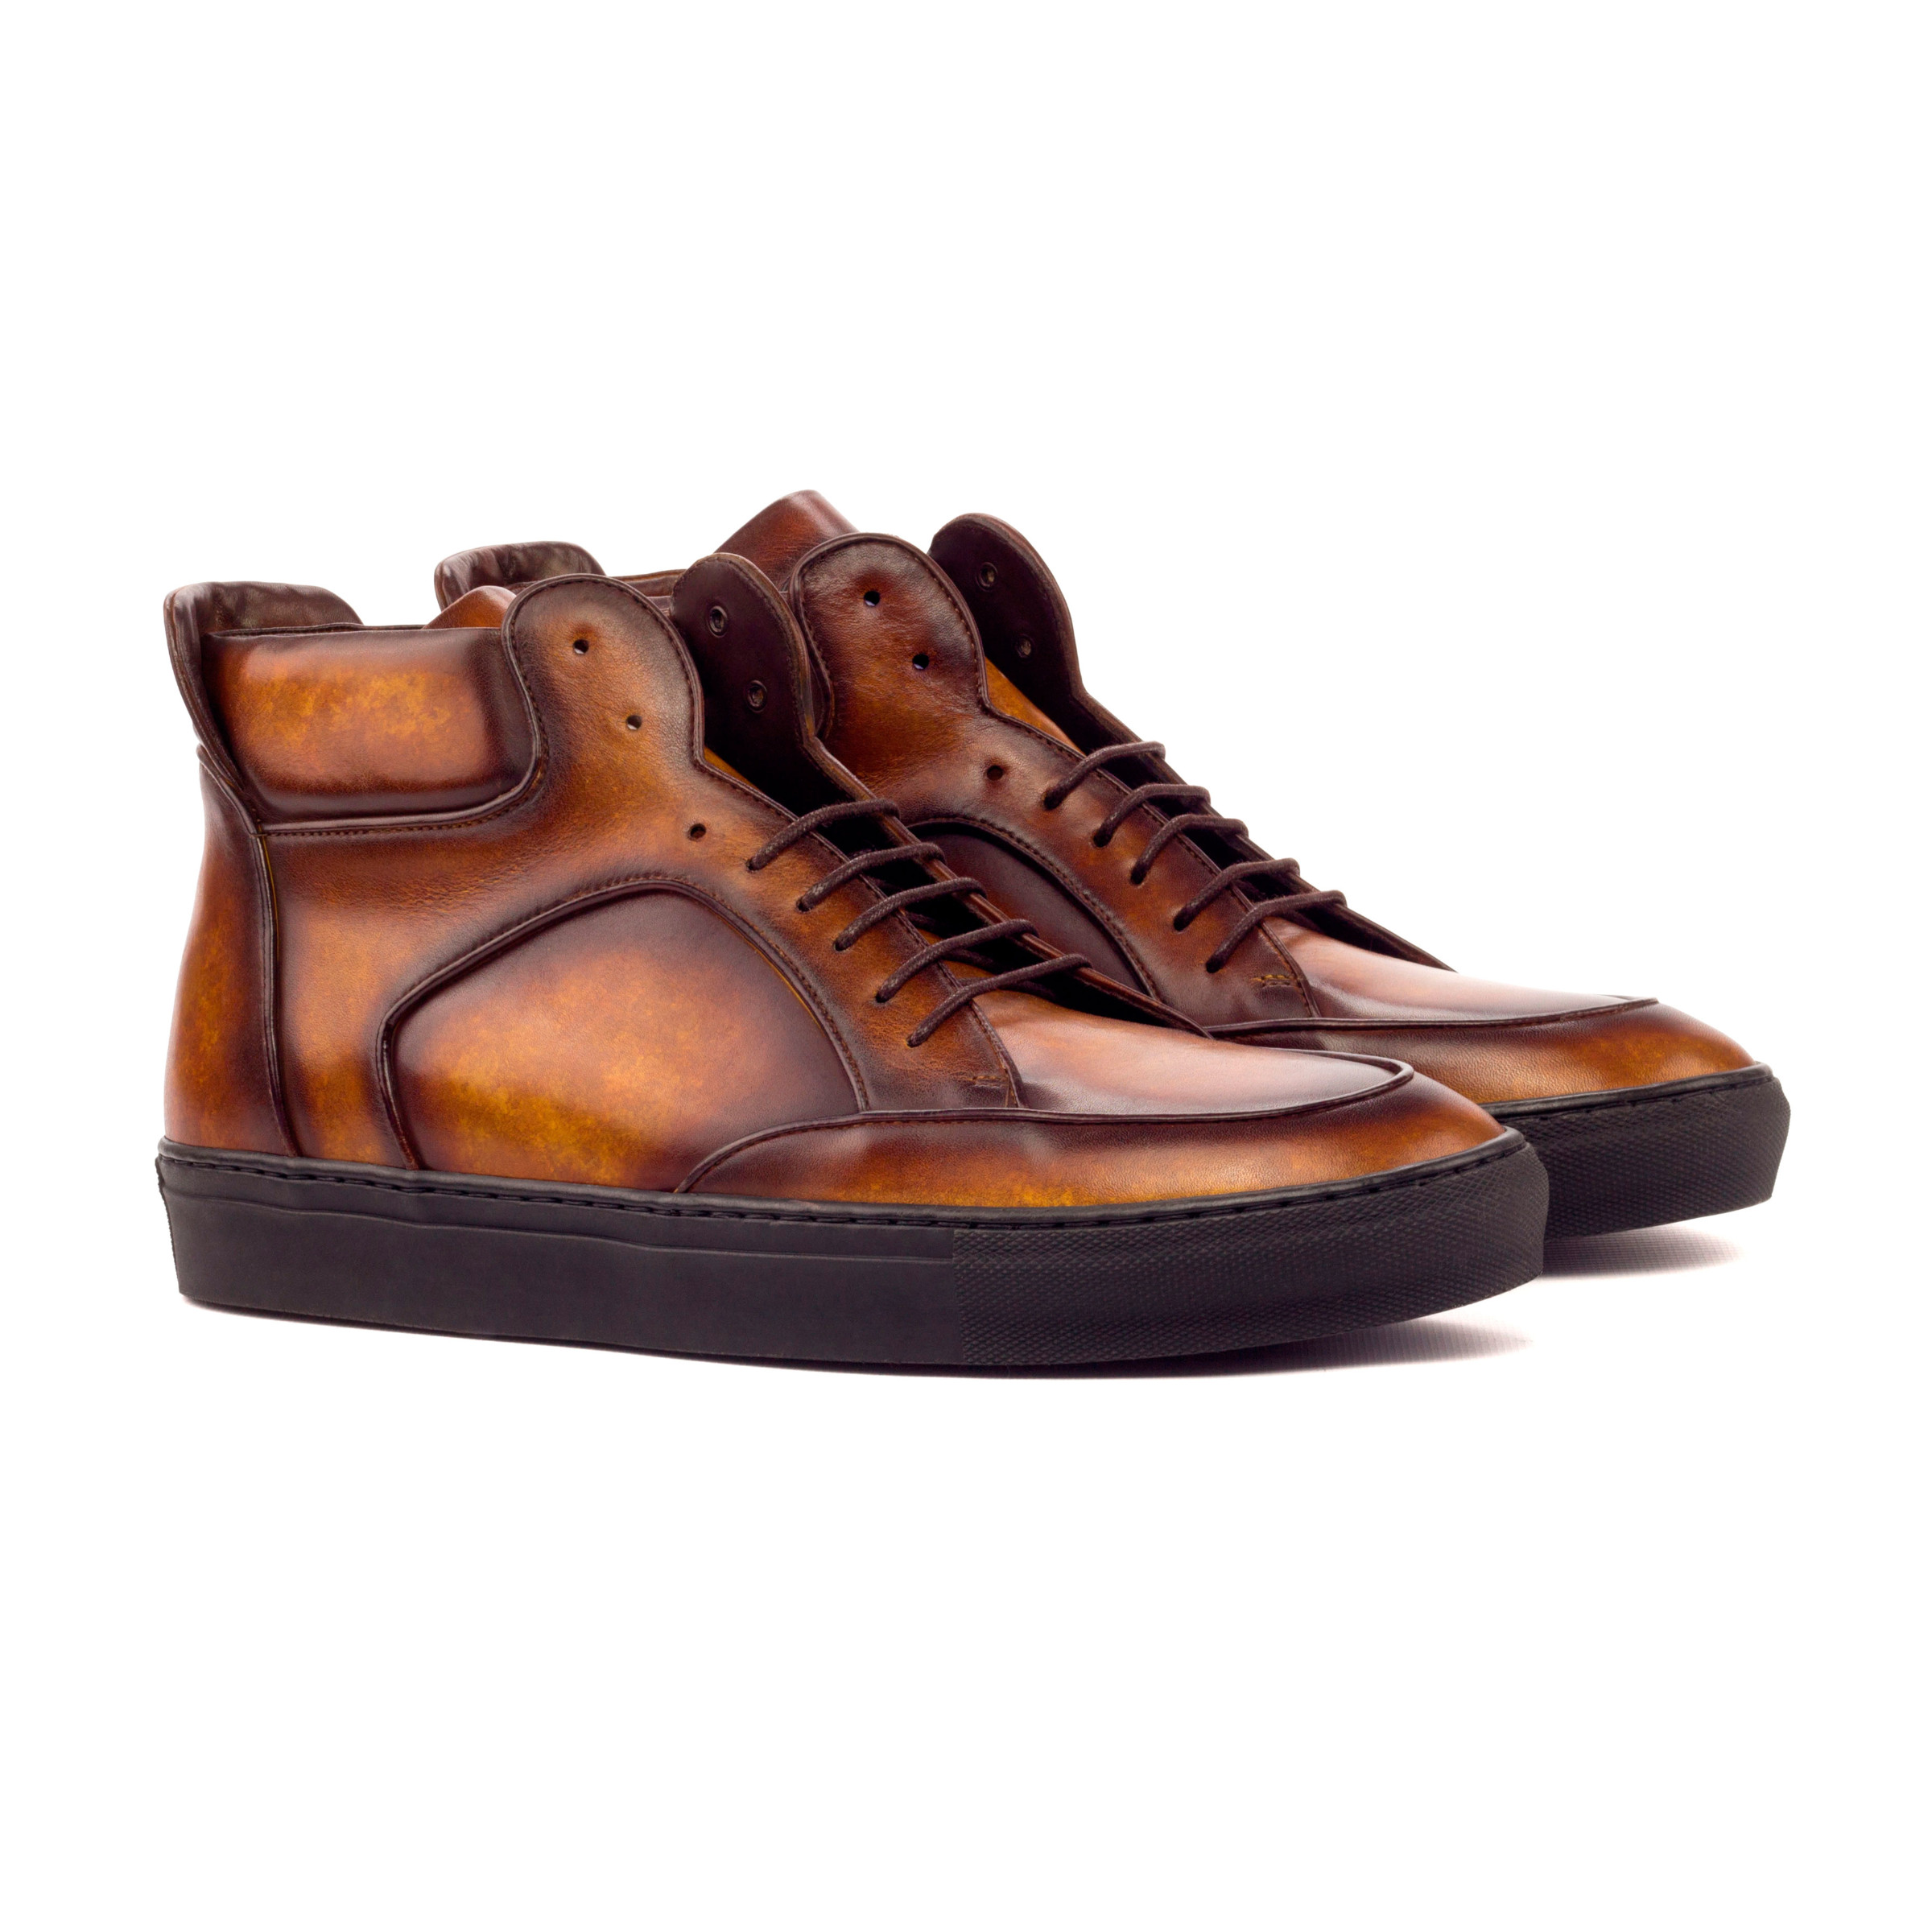 Front side view of the high top: cognac patina leather style sneakers with black soles on a white background